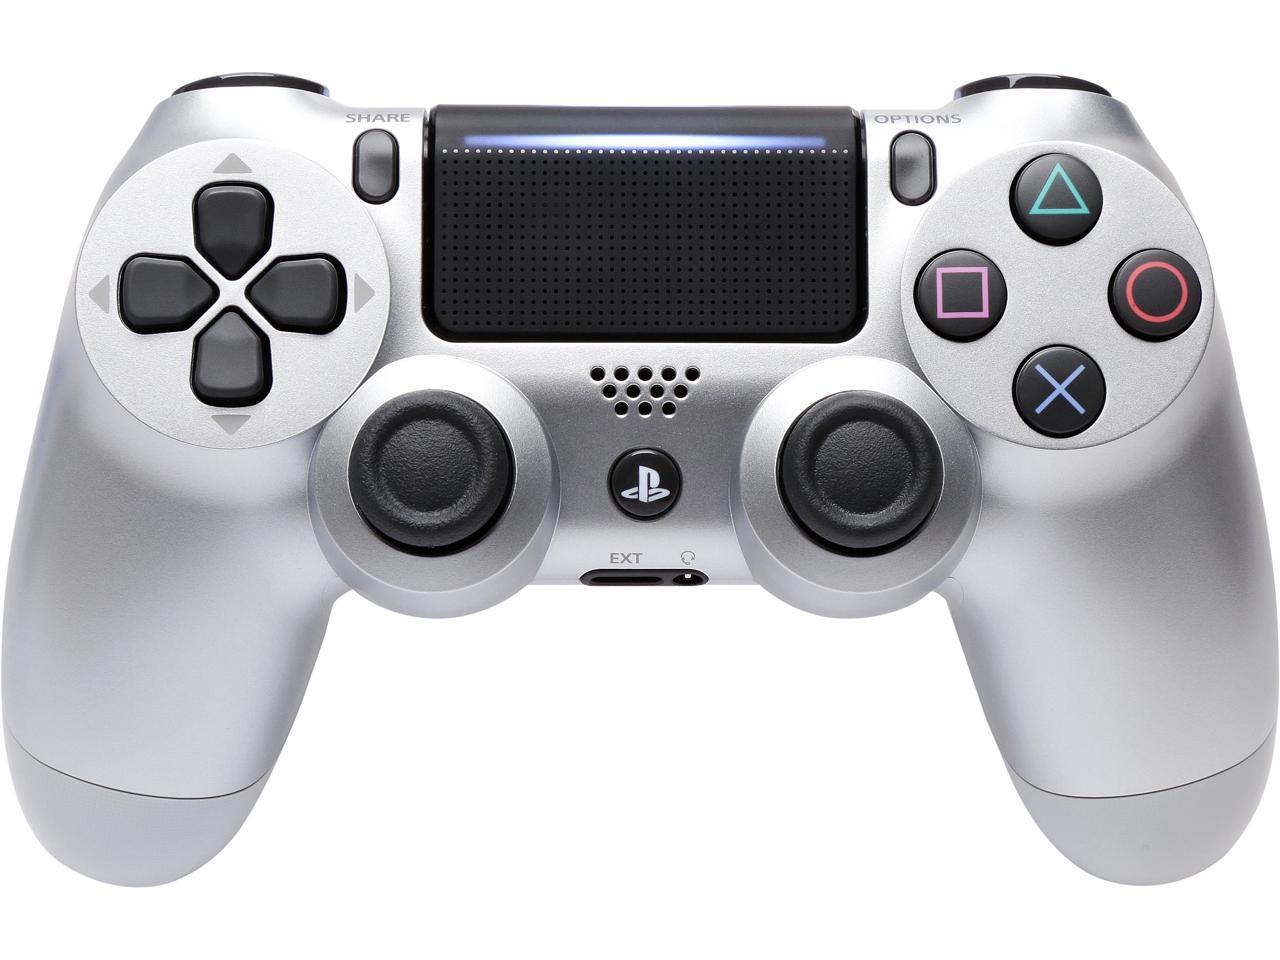 Save $10 Or More On A New PS4 Controller - GameSpot